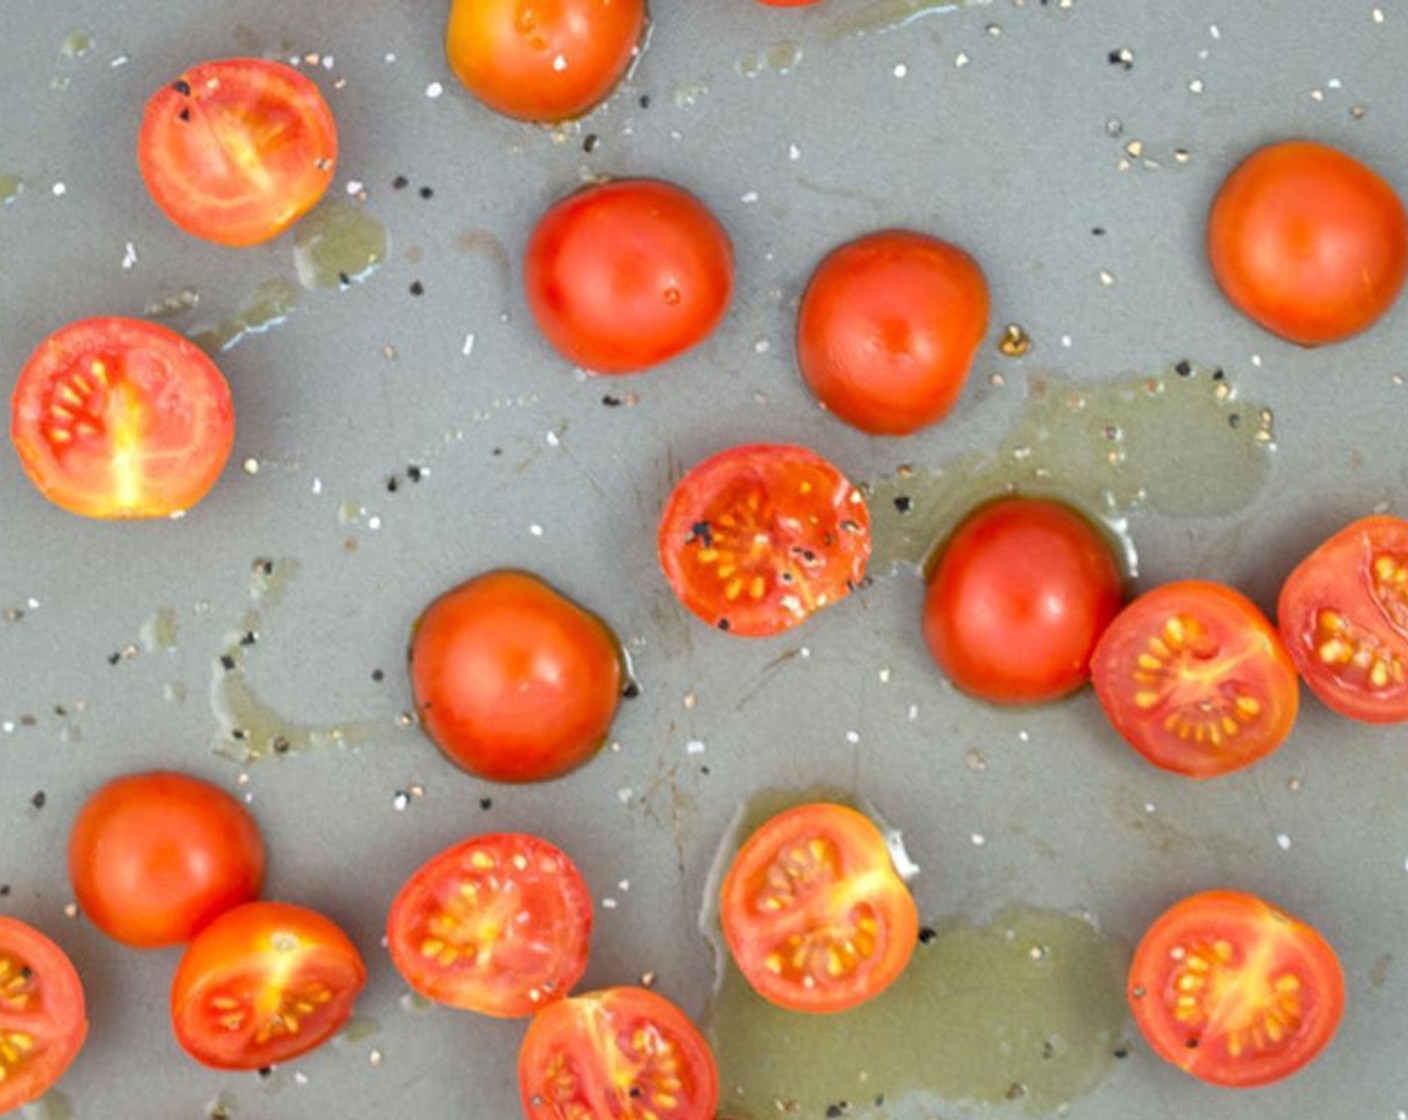 step 6 Cut Cherry Tomatoes (2 cups) in half lengthwise. Place cut side down onto baking sheet. Drizzle with Extra-Virgin Olive Oil (1 Tbsp) and season with Salt (1/2 tsp) and Ground Black Pepper (1/4 tsp).